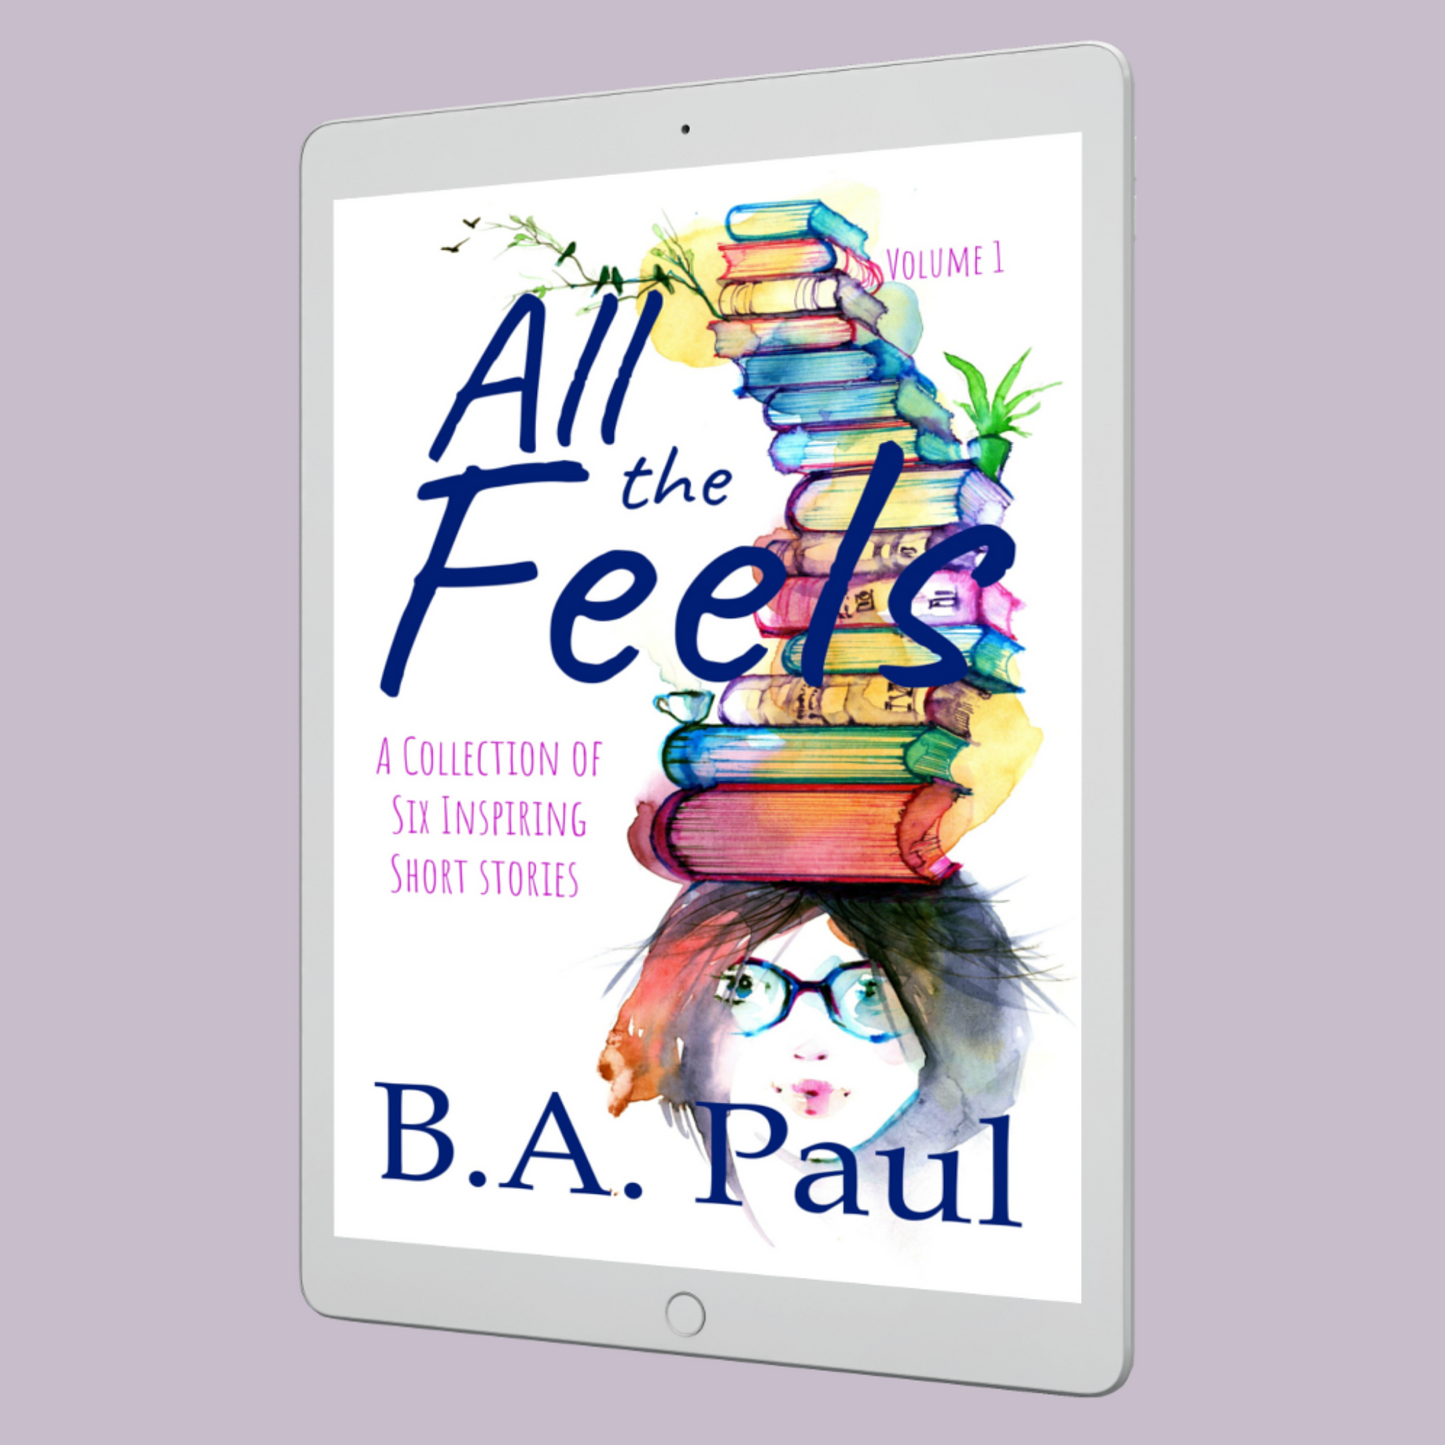 All the Feels Volume 1: A Collection of Six Inspiring Short Stories, E-book